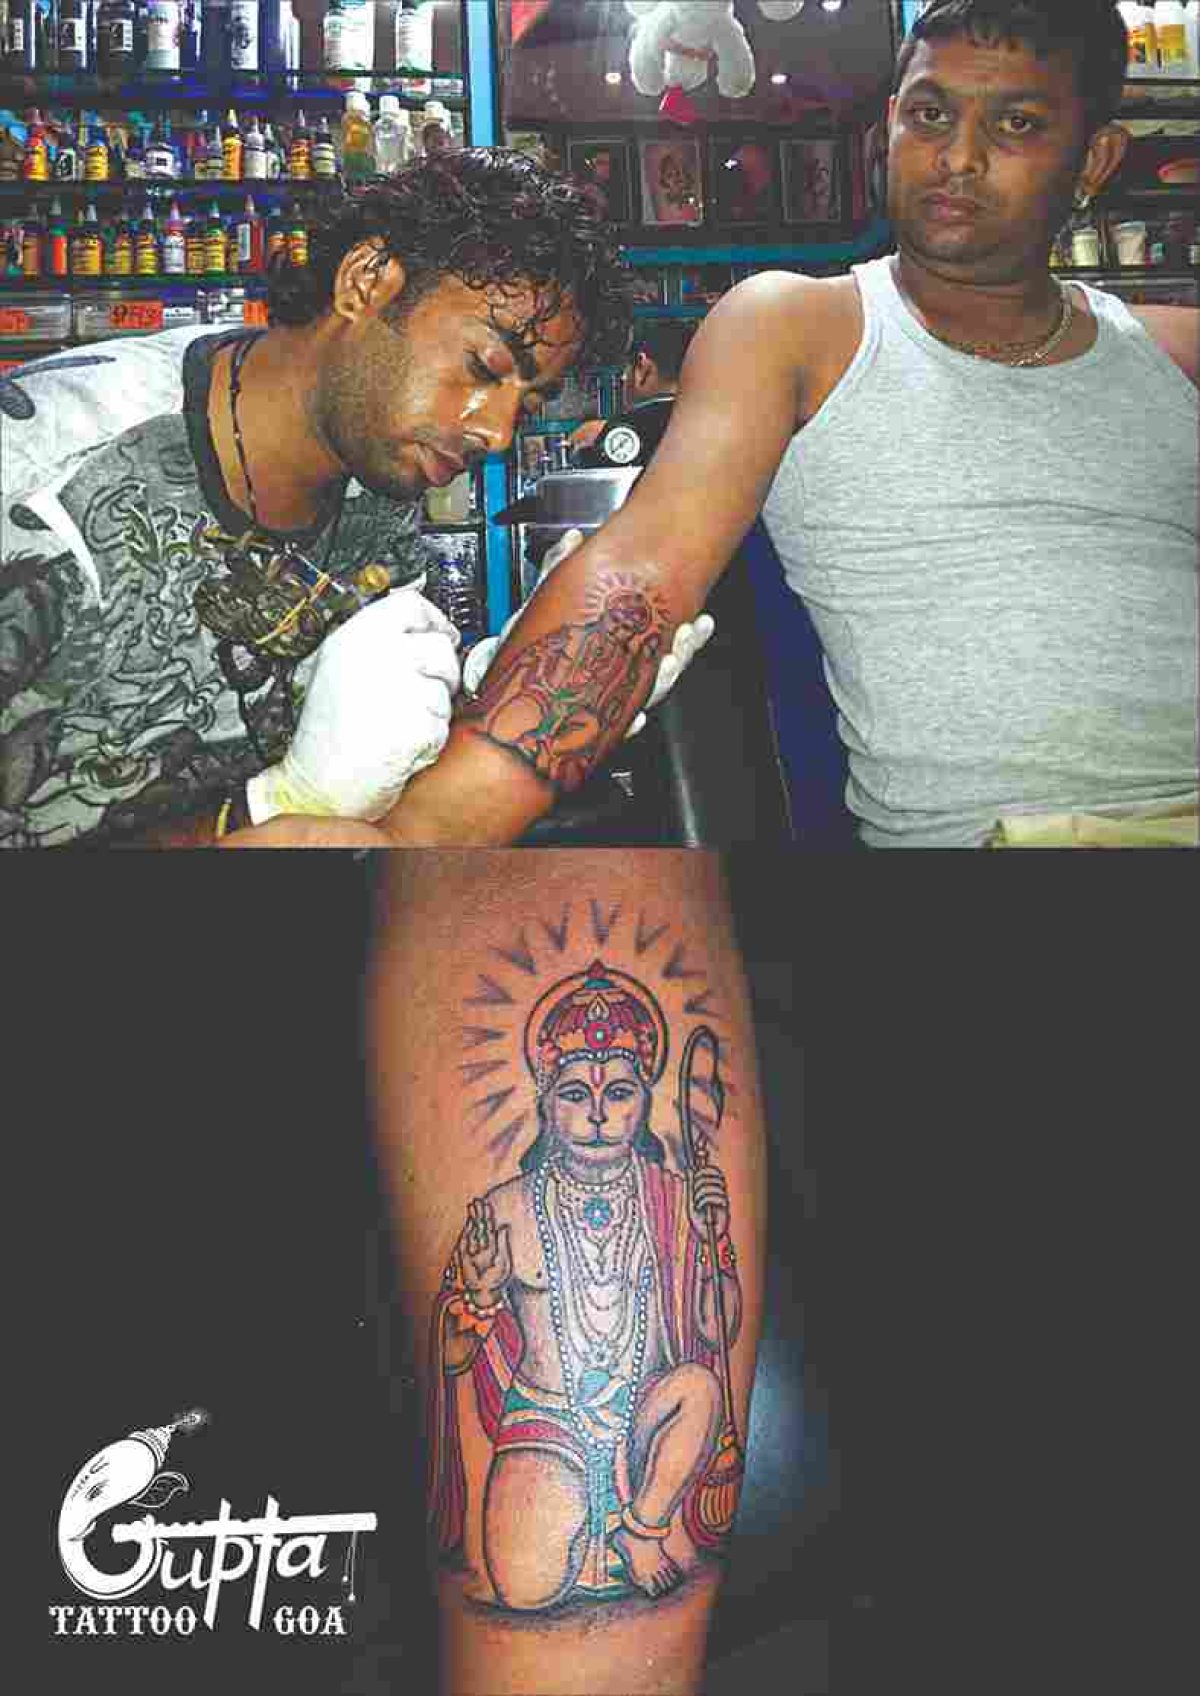 8 Hanuman Tattoo Designs for the Devoted and Brave